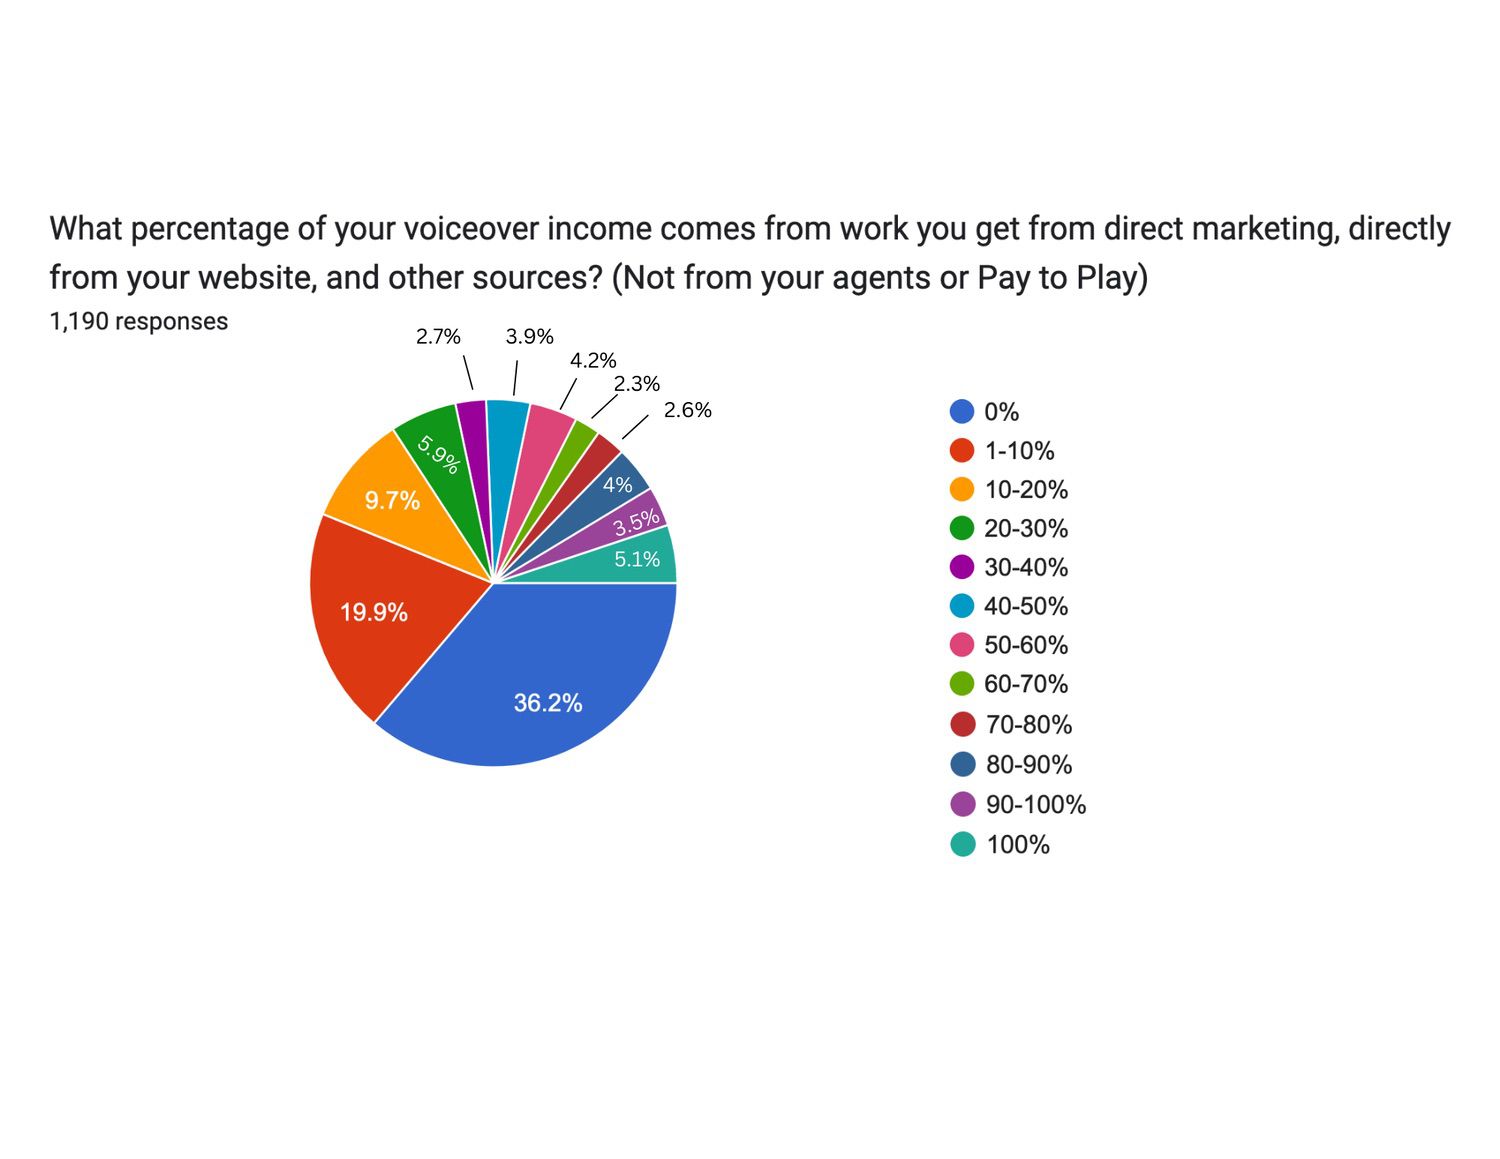 What percentage of your voiceover income comes from work you get from direct marketing, directly from your website, and other sources?